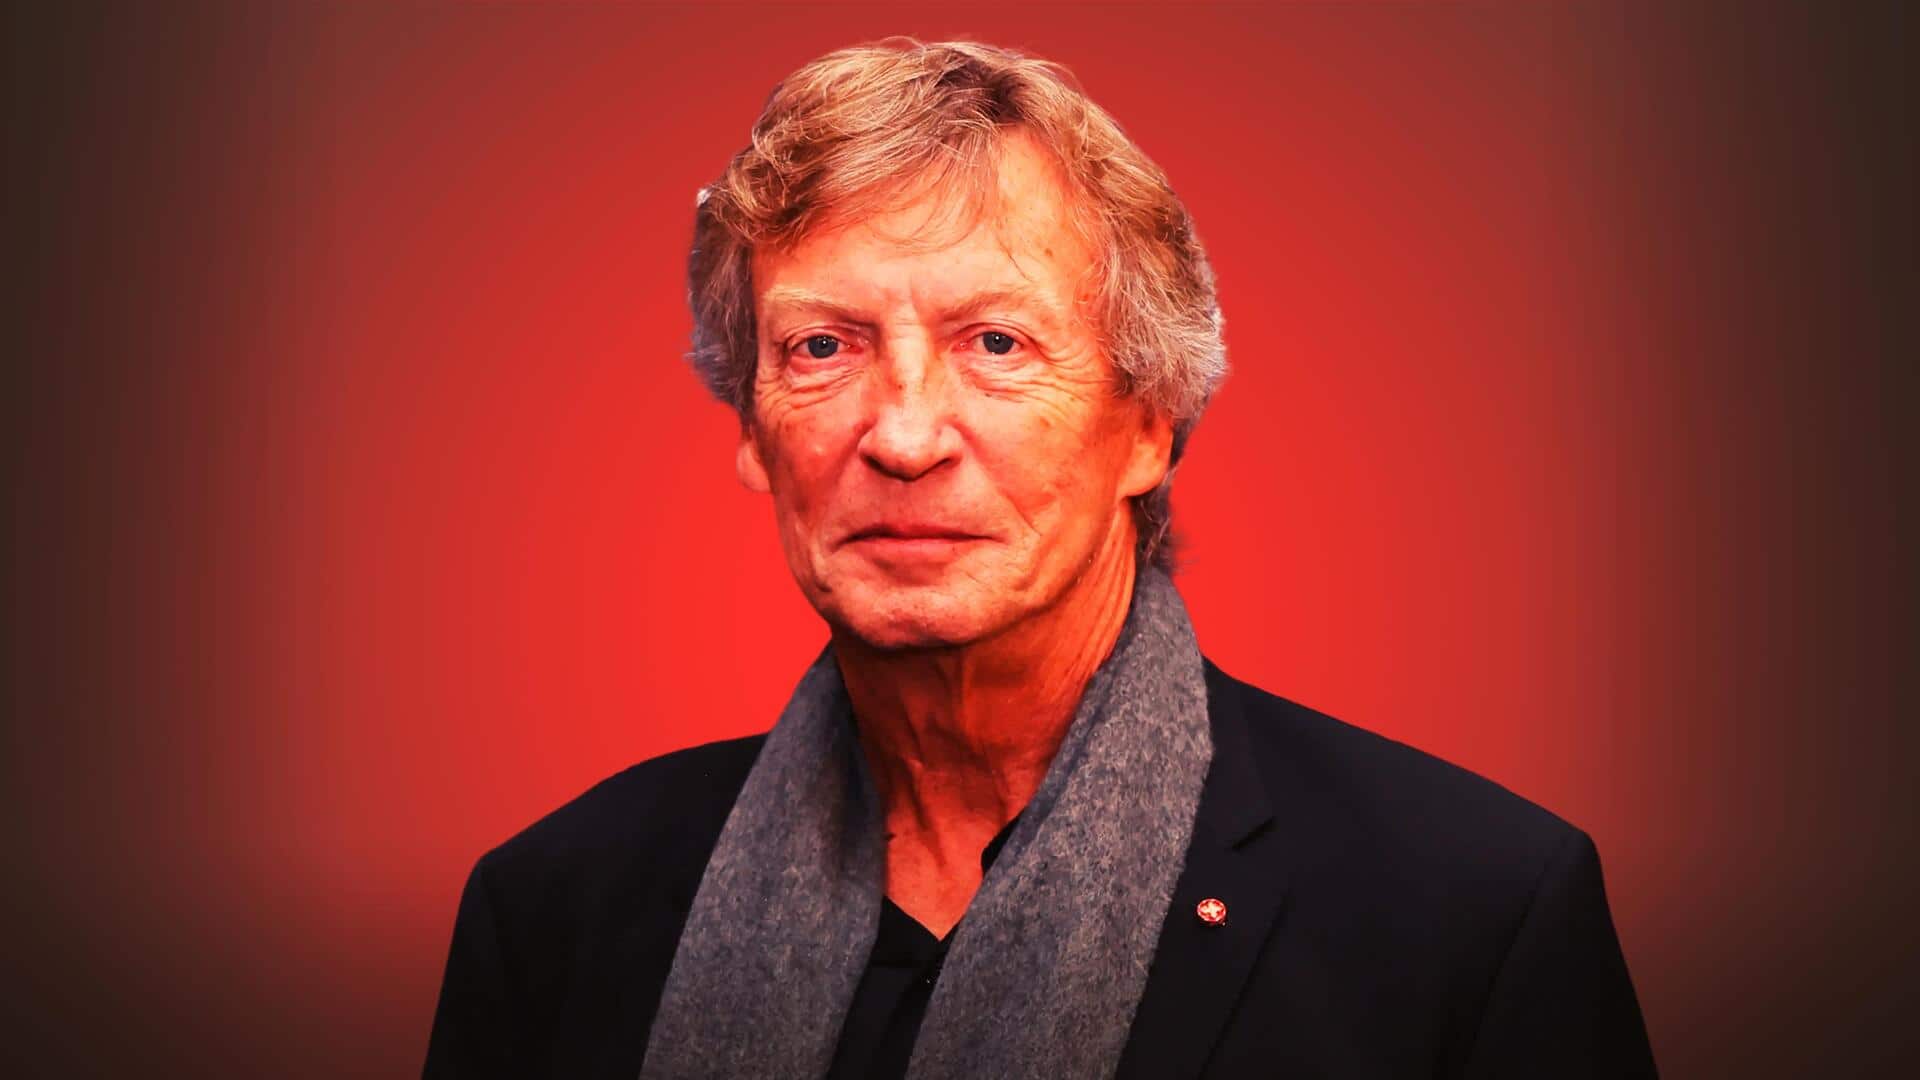 Know why Nigel Lythgoe is under investigation for assault lawsuits